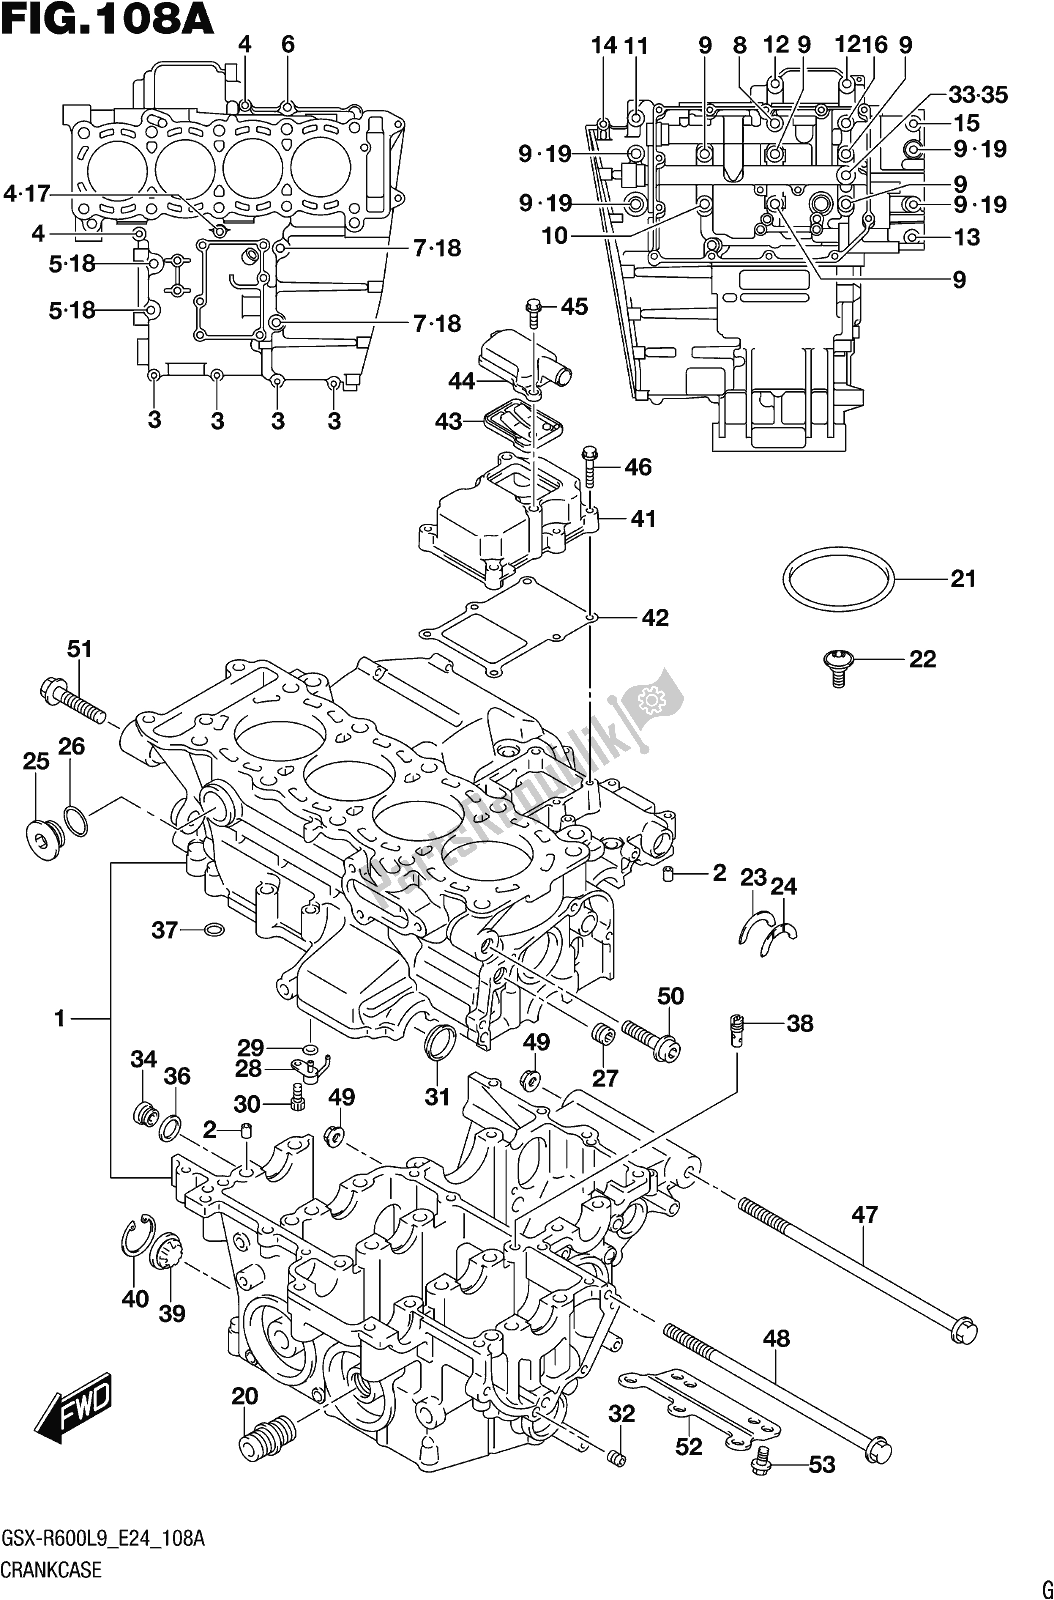 All parts for the Fig. 108a Crankcase of the Suzuki Gsx-r 600 2019